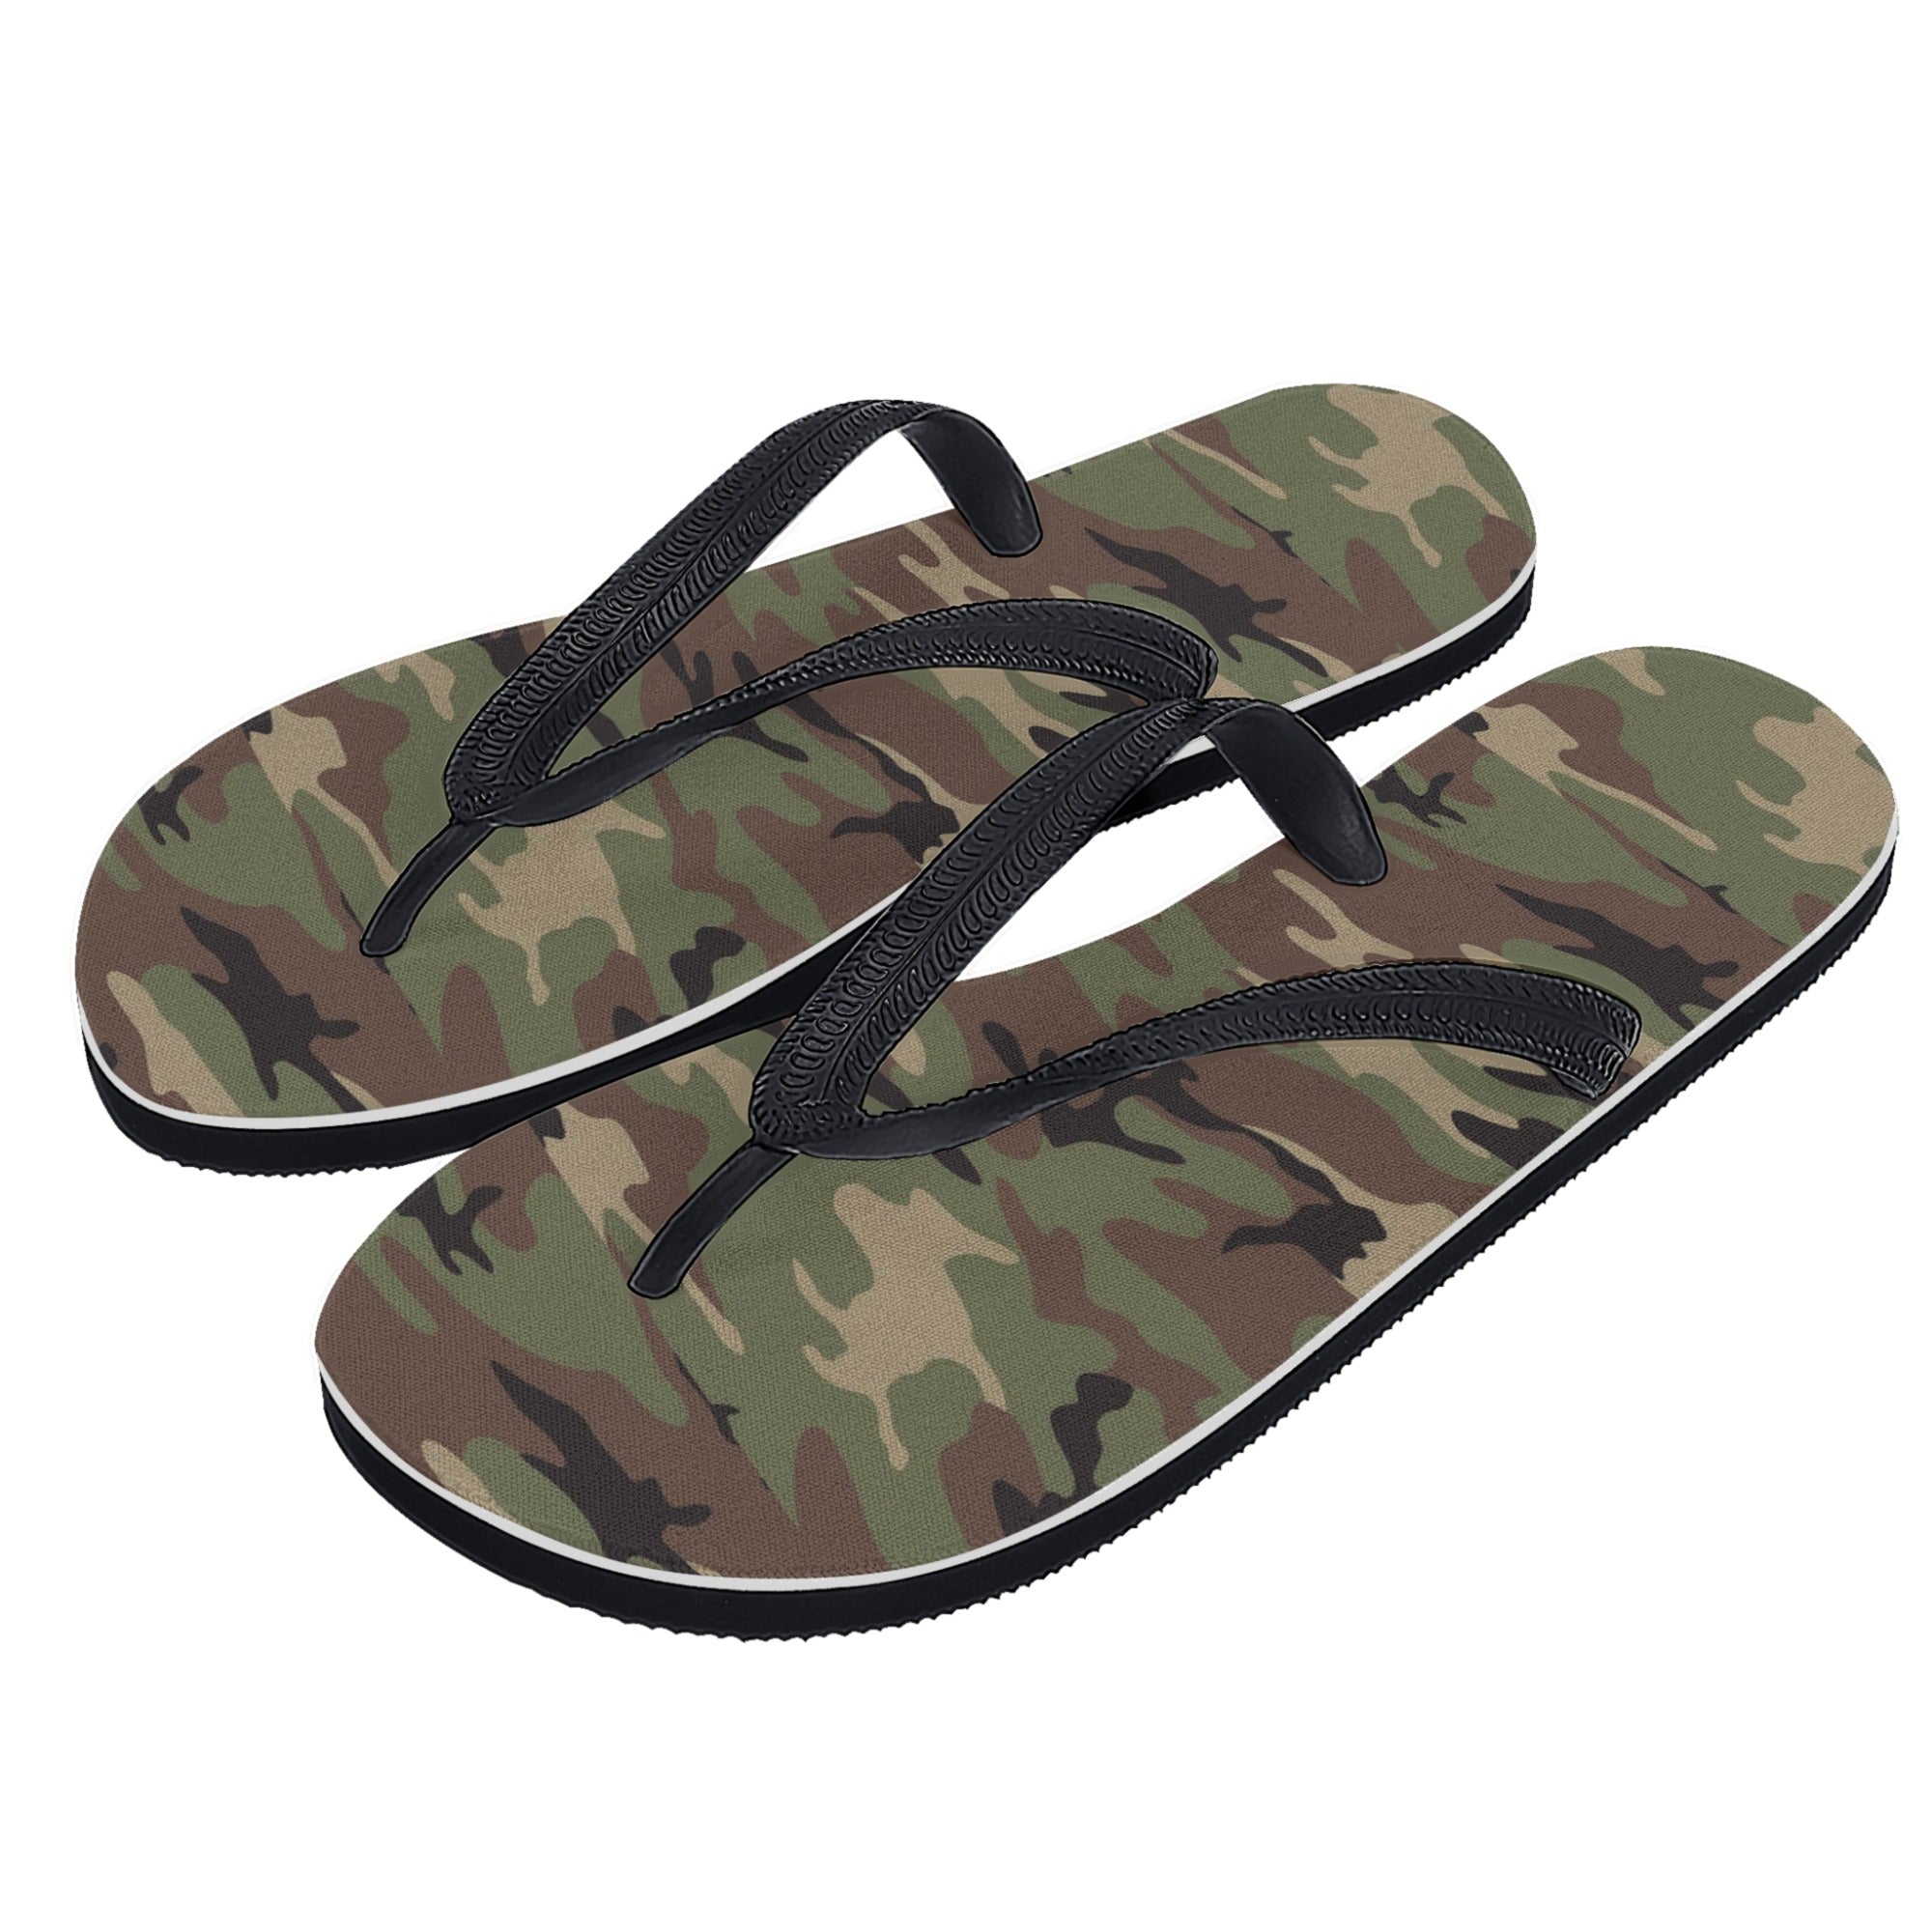 Tongs pour hommes - Camouflage